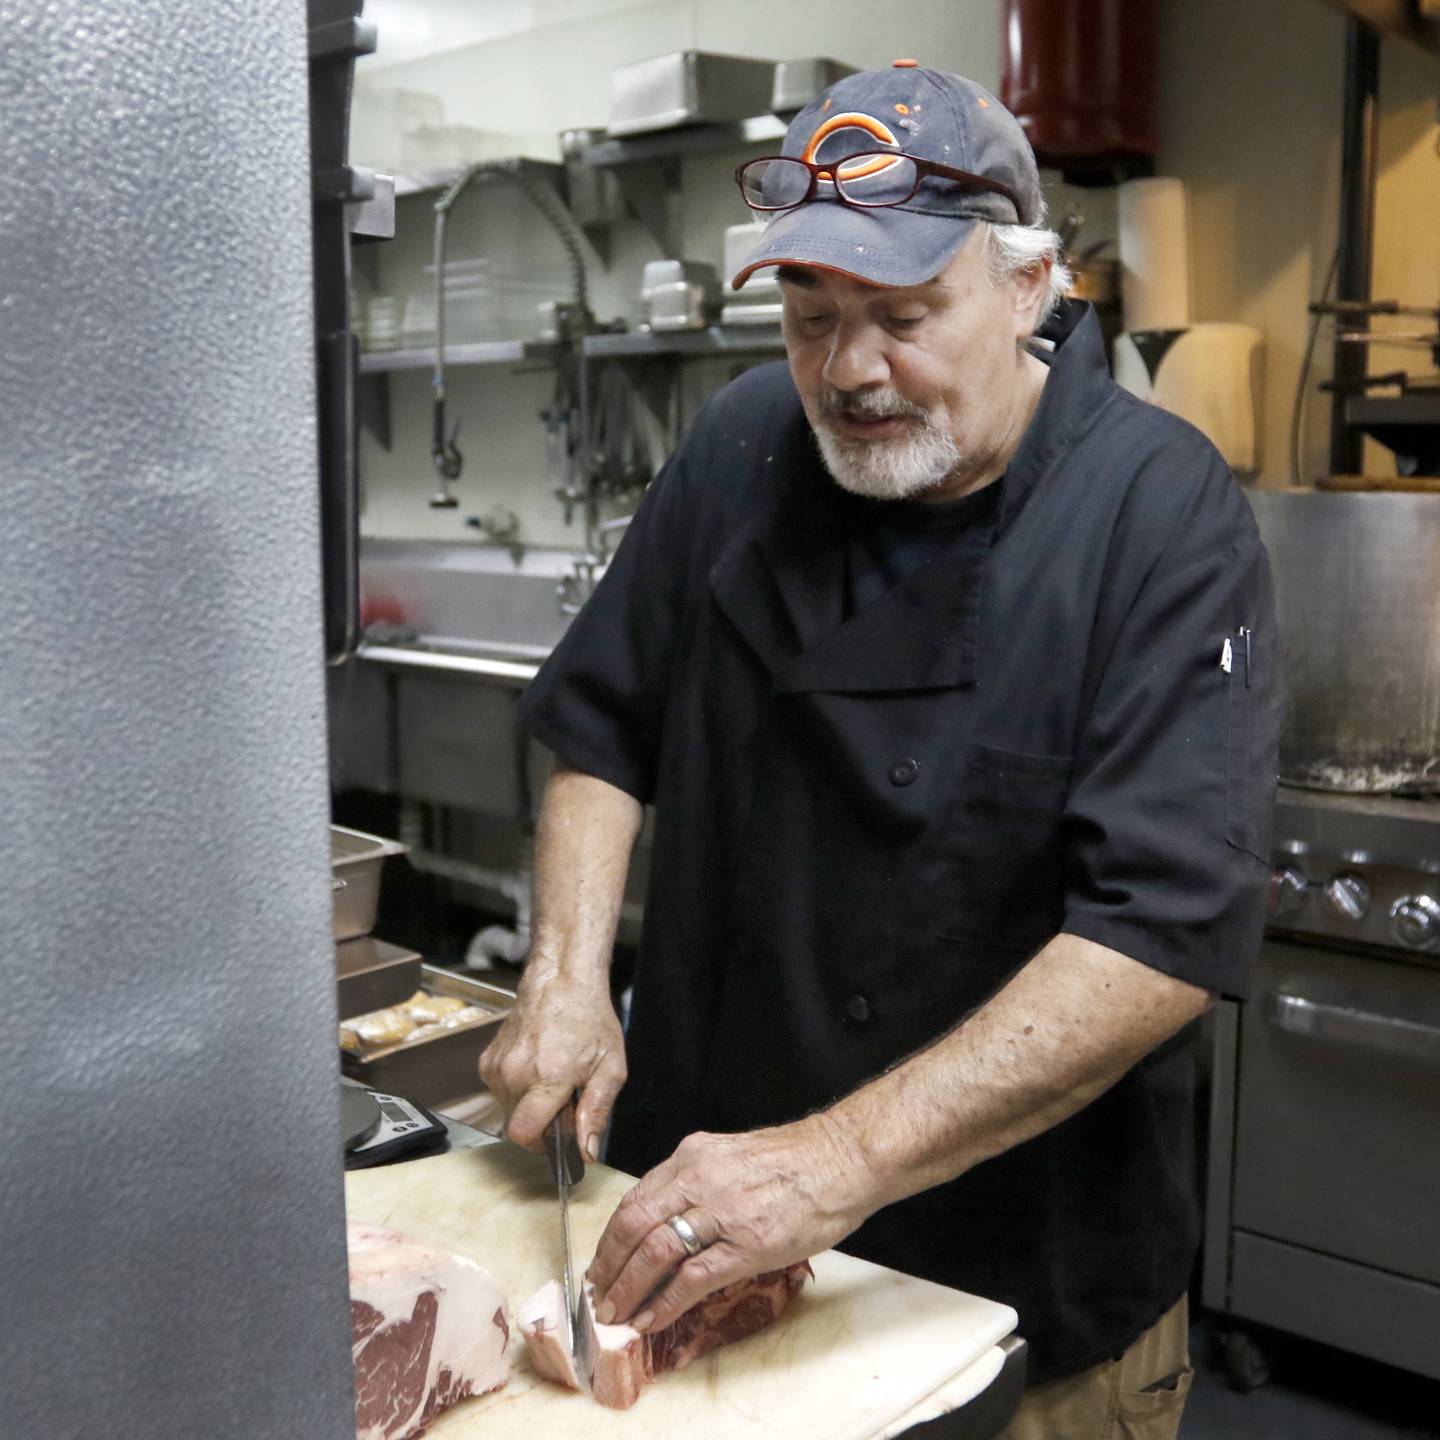 Michael Borlek, the executive chef at the Addison's Steakhouse, cuts steaks as he prepares food for the dinner service Thursday, Sept. 7, 2022, at the restaurant, 335 Front St. in McHenry. Some area restaurants are still struggling to find staff.